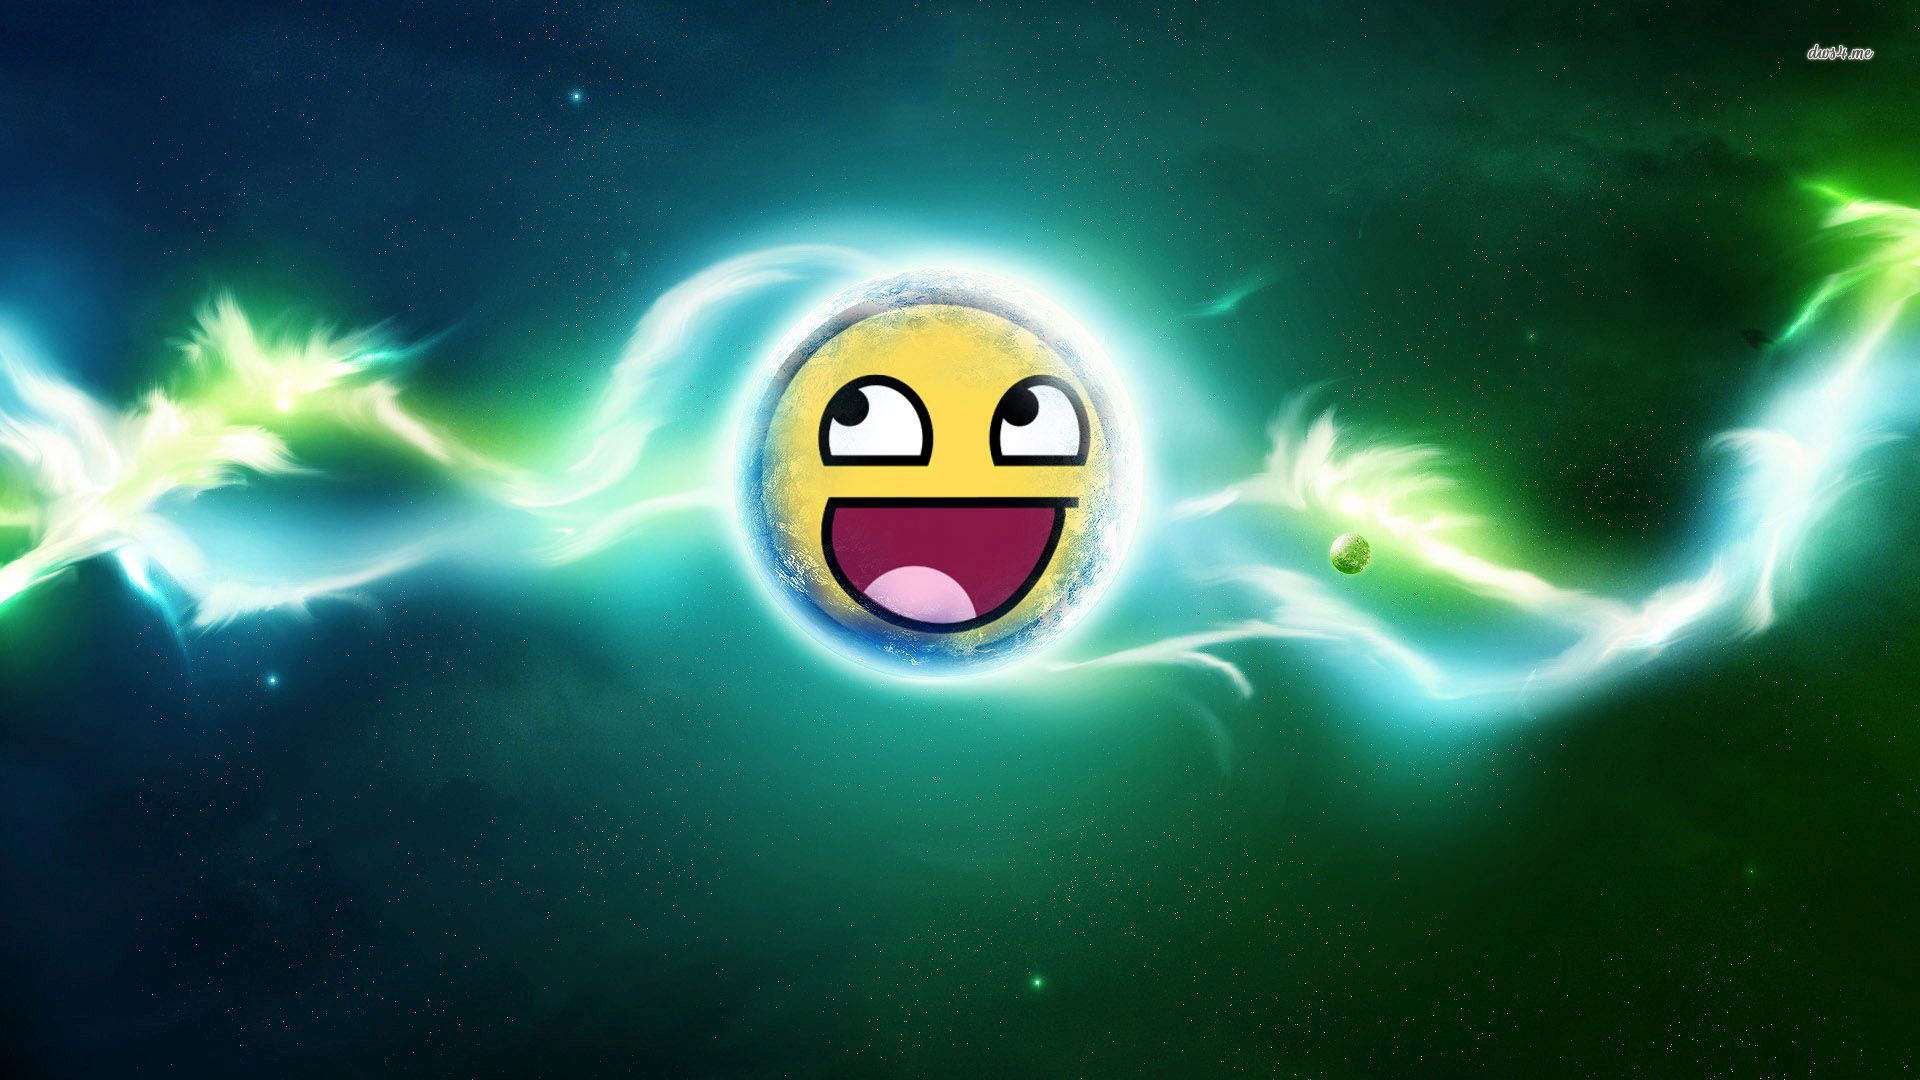 Awesome Face in Space wallpaper   Meme wallpapers   29009